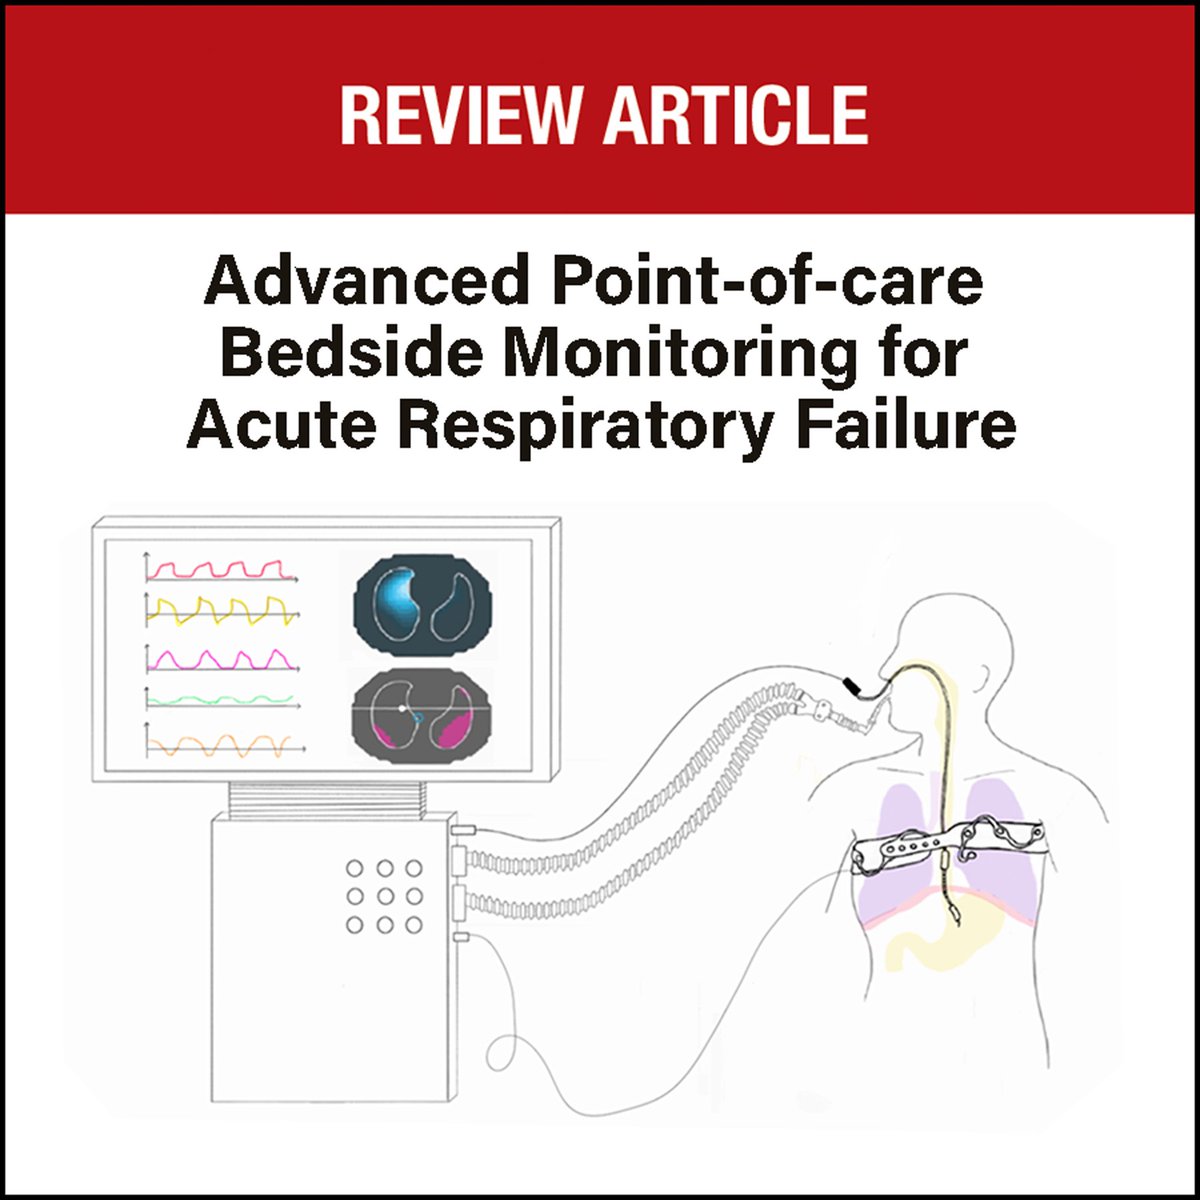 Advanced respiratory #monitoring involves several mini- or noninvasive tools, applicable at bedside, that have the potential to support clinicians in the management of acute respiratory failure. Learn more about the personalization of ventilatory strategy: ow.ly/rLgH50OrZNg